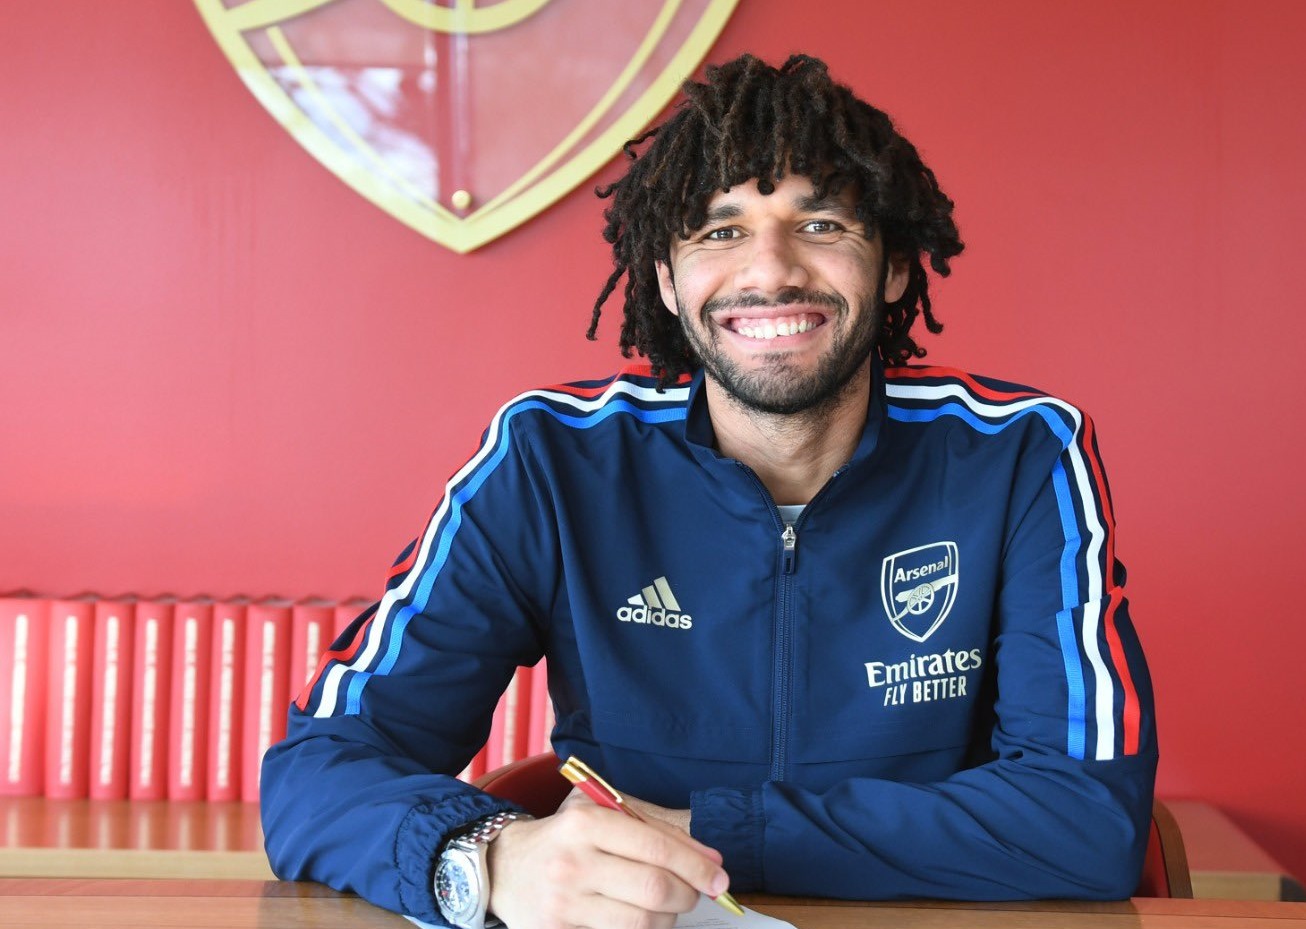 Arsenal renew the contract of Egyptian Mohamed Elneny